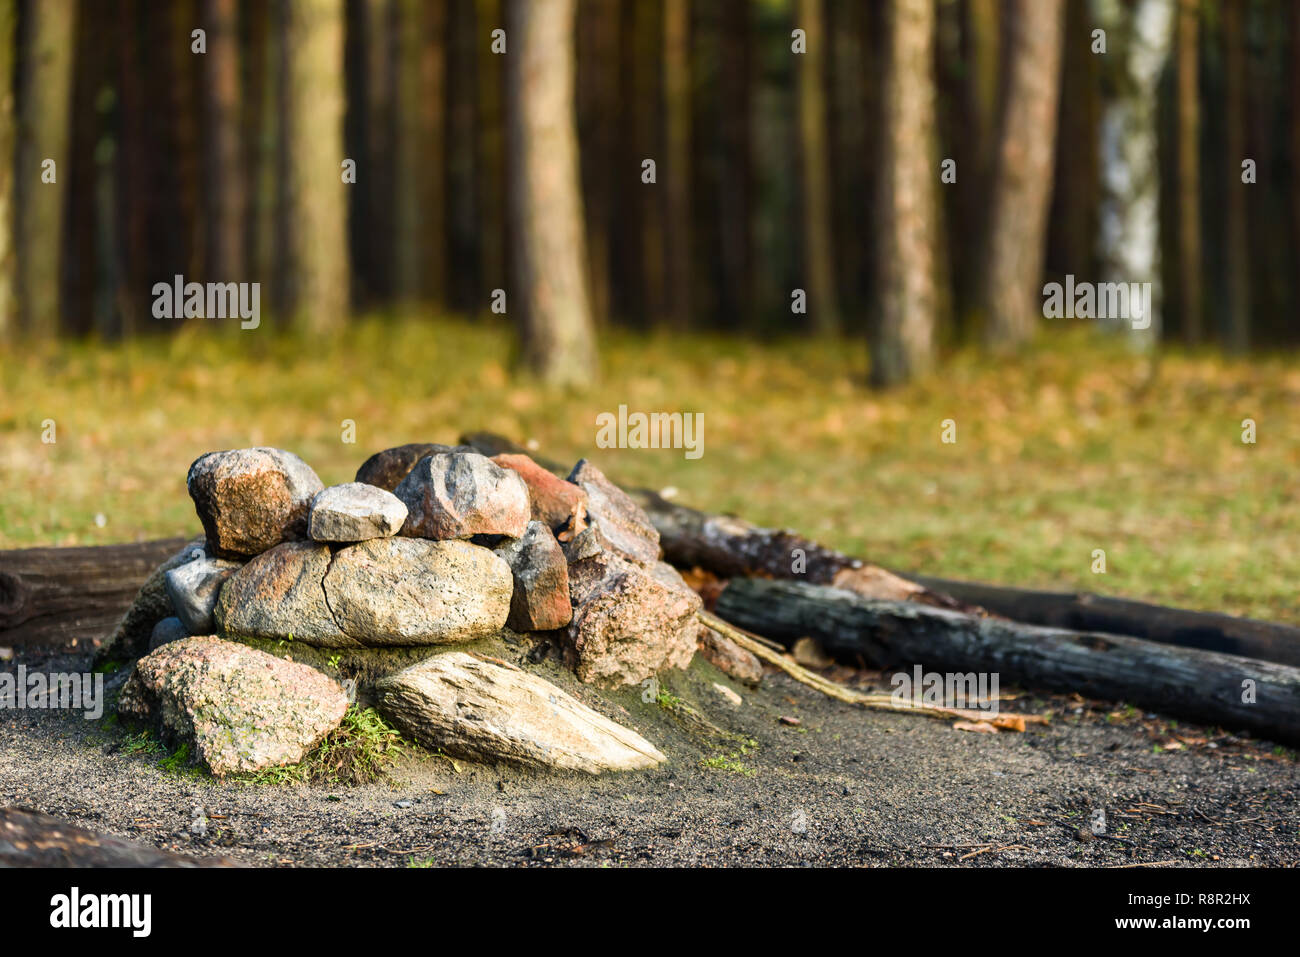 Mound of stones forming a firepit in forest landscape. Stock Photo